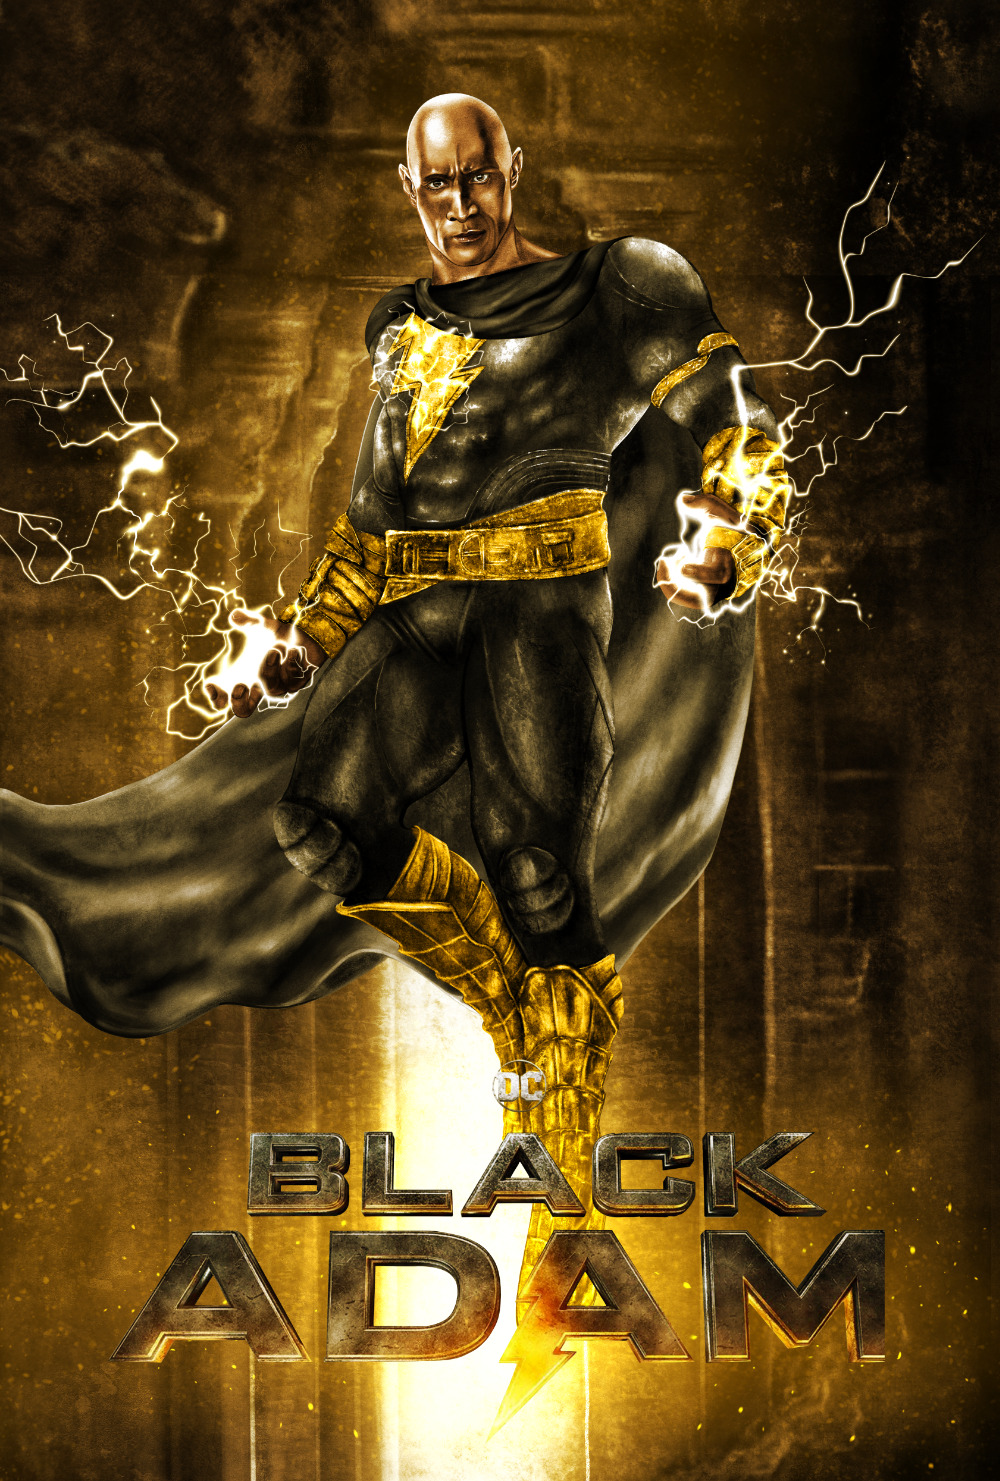 BLACK ADAM ILLUSTRATED POSTER ART COLLECTION 3